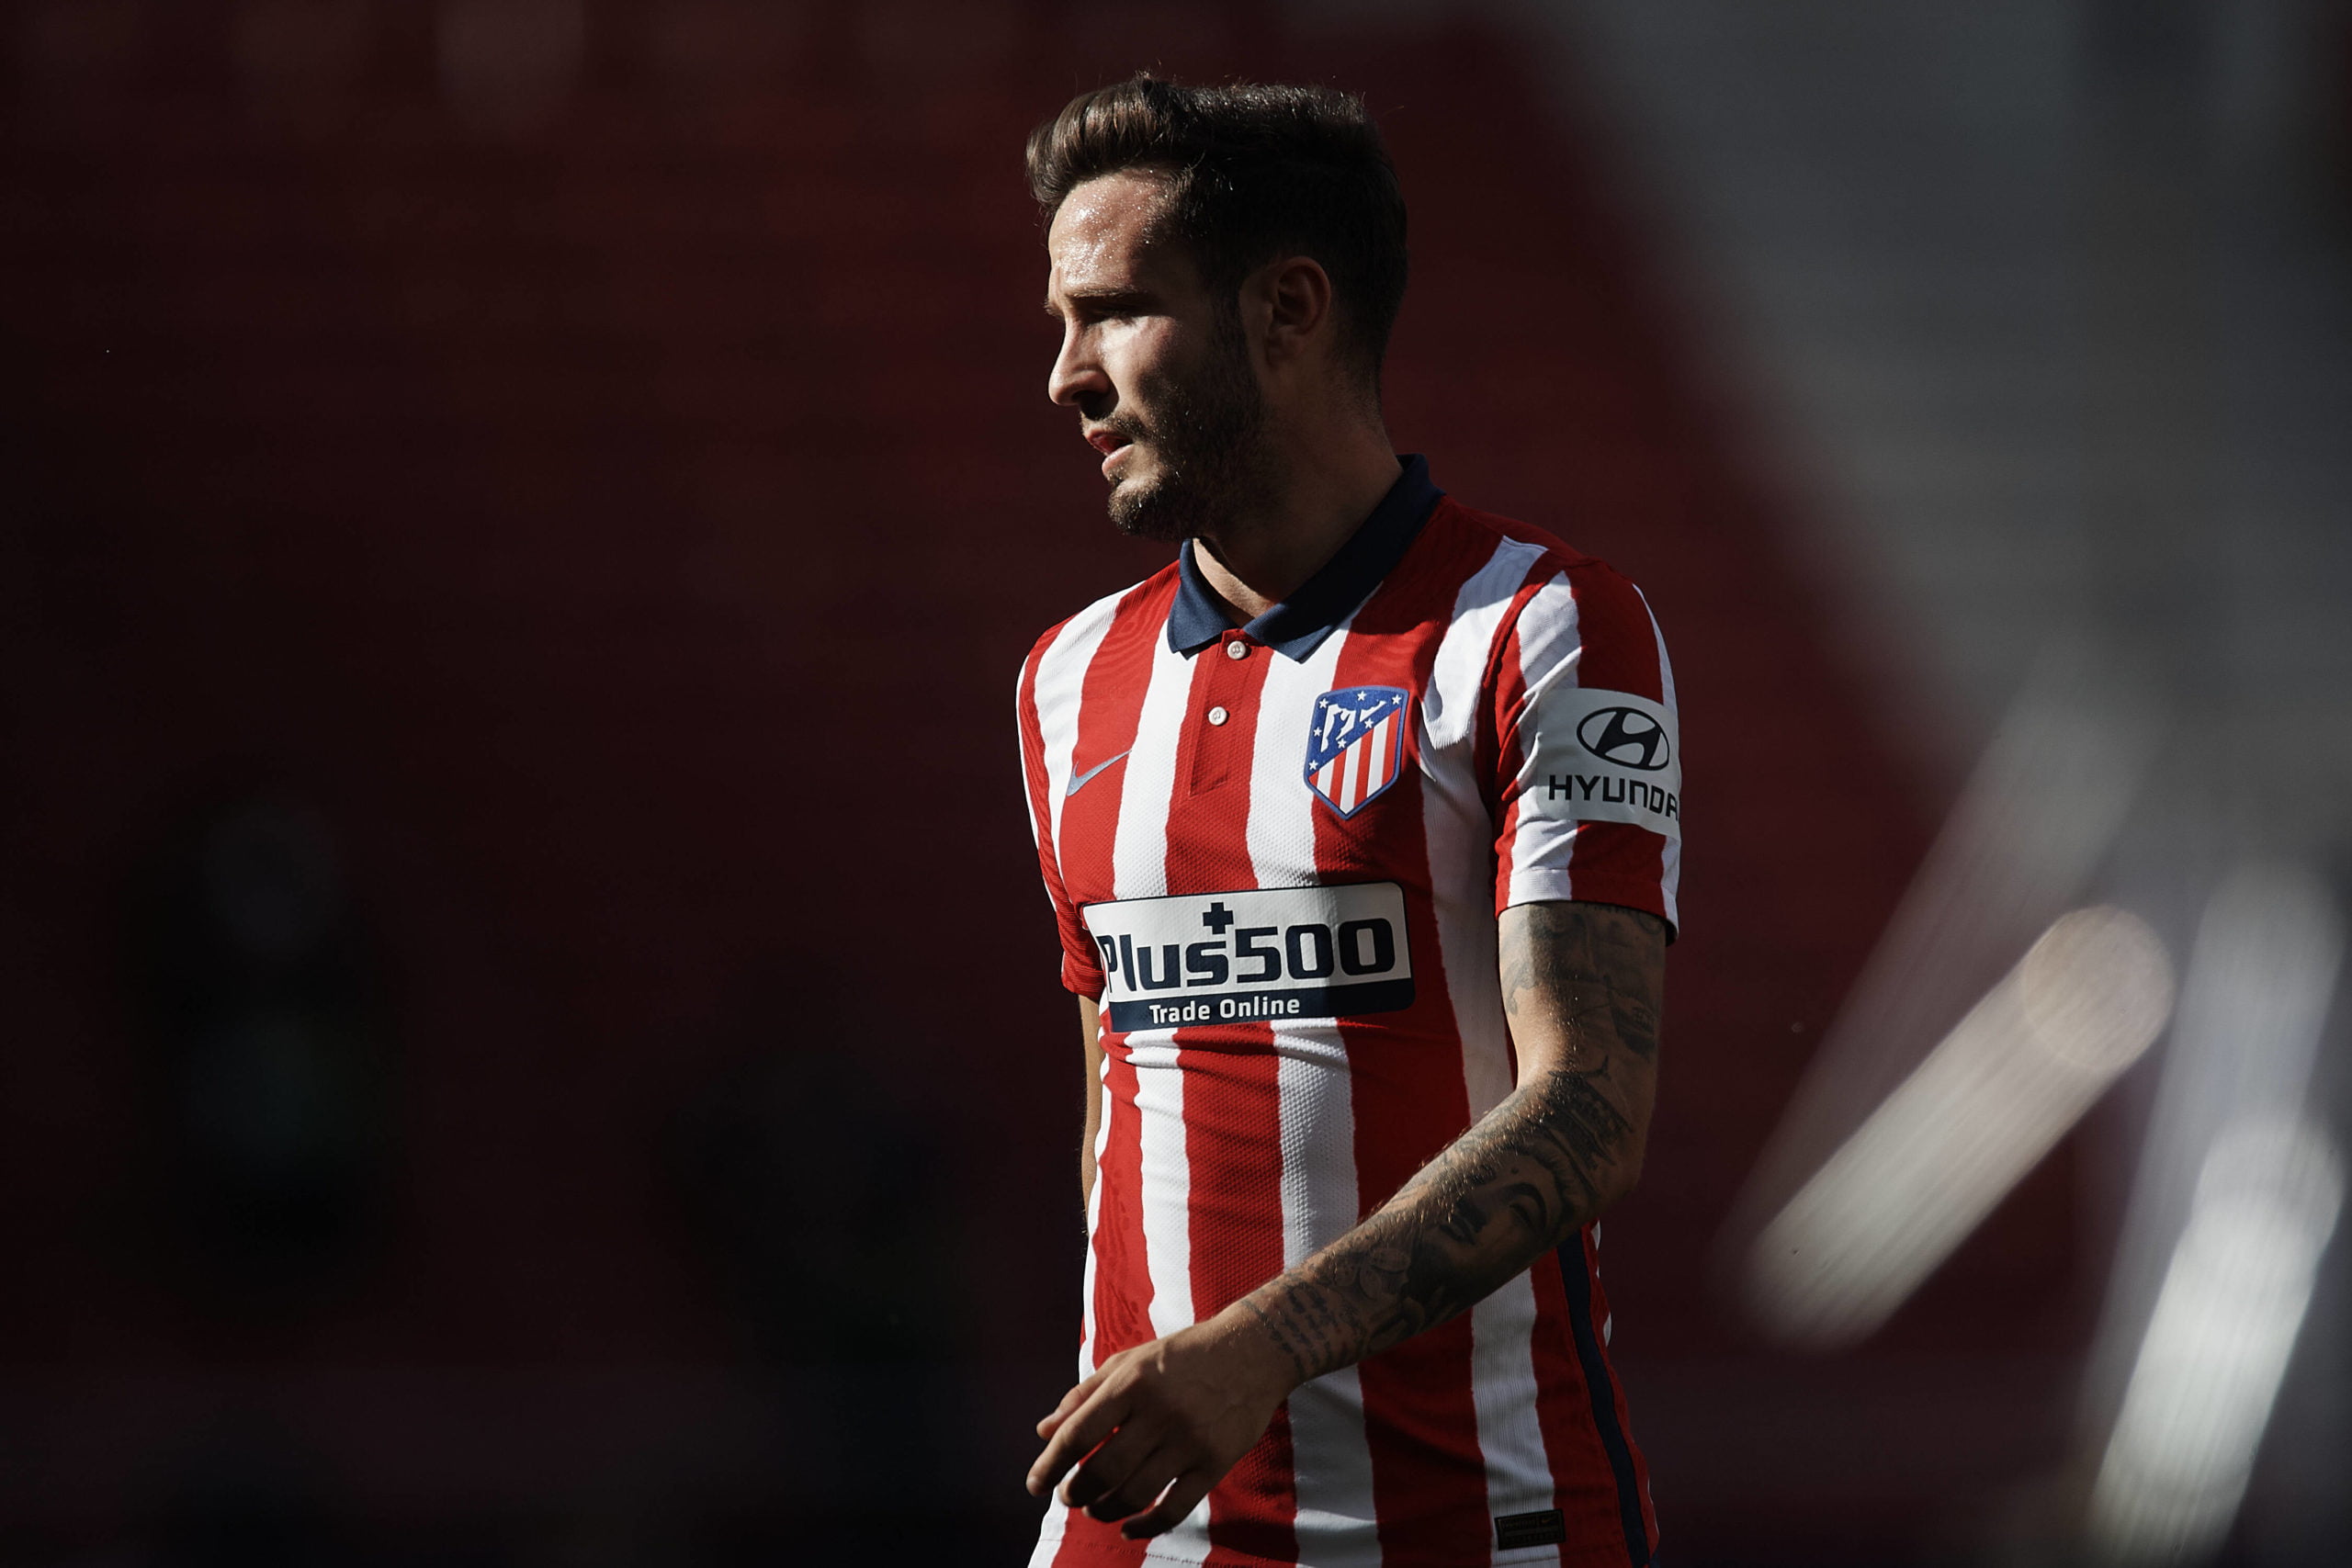 Chelsea eager to seal a loan move for Saul Niguez who is seen in the photo